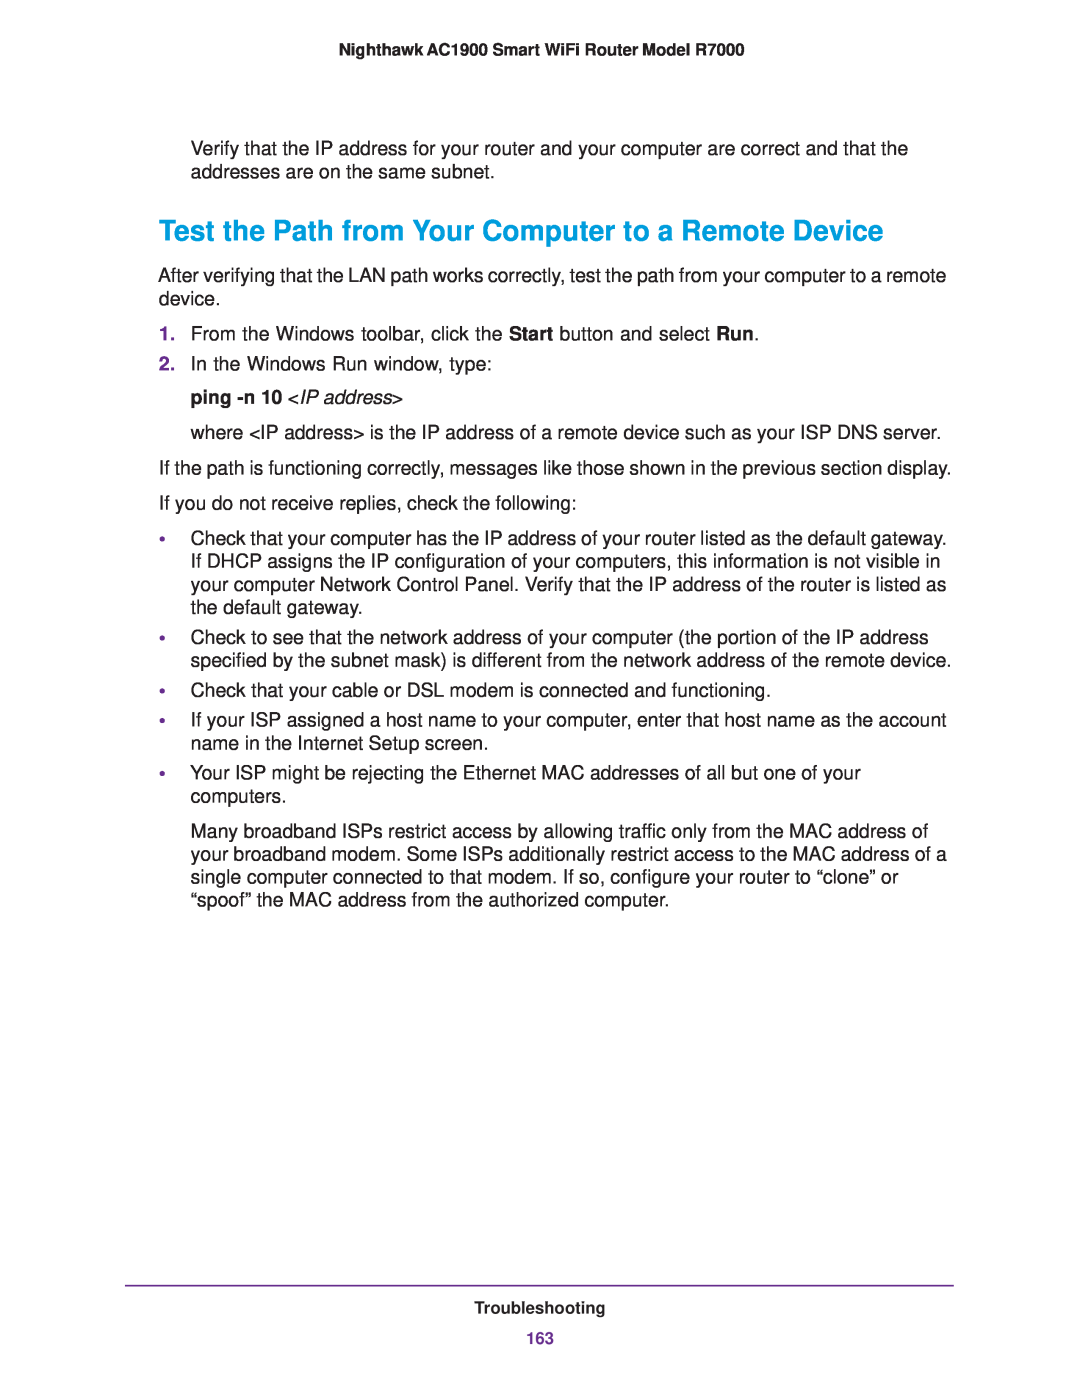 NETGEAR R7000 user manual Test the Path from Your Computer to a Remote Device 